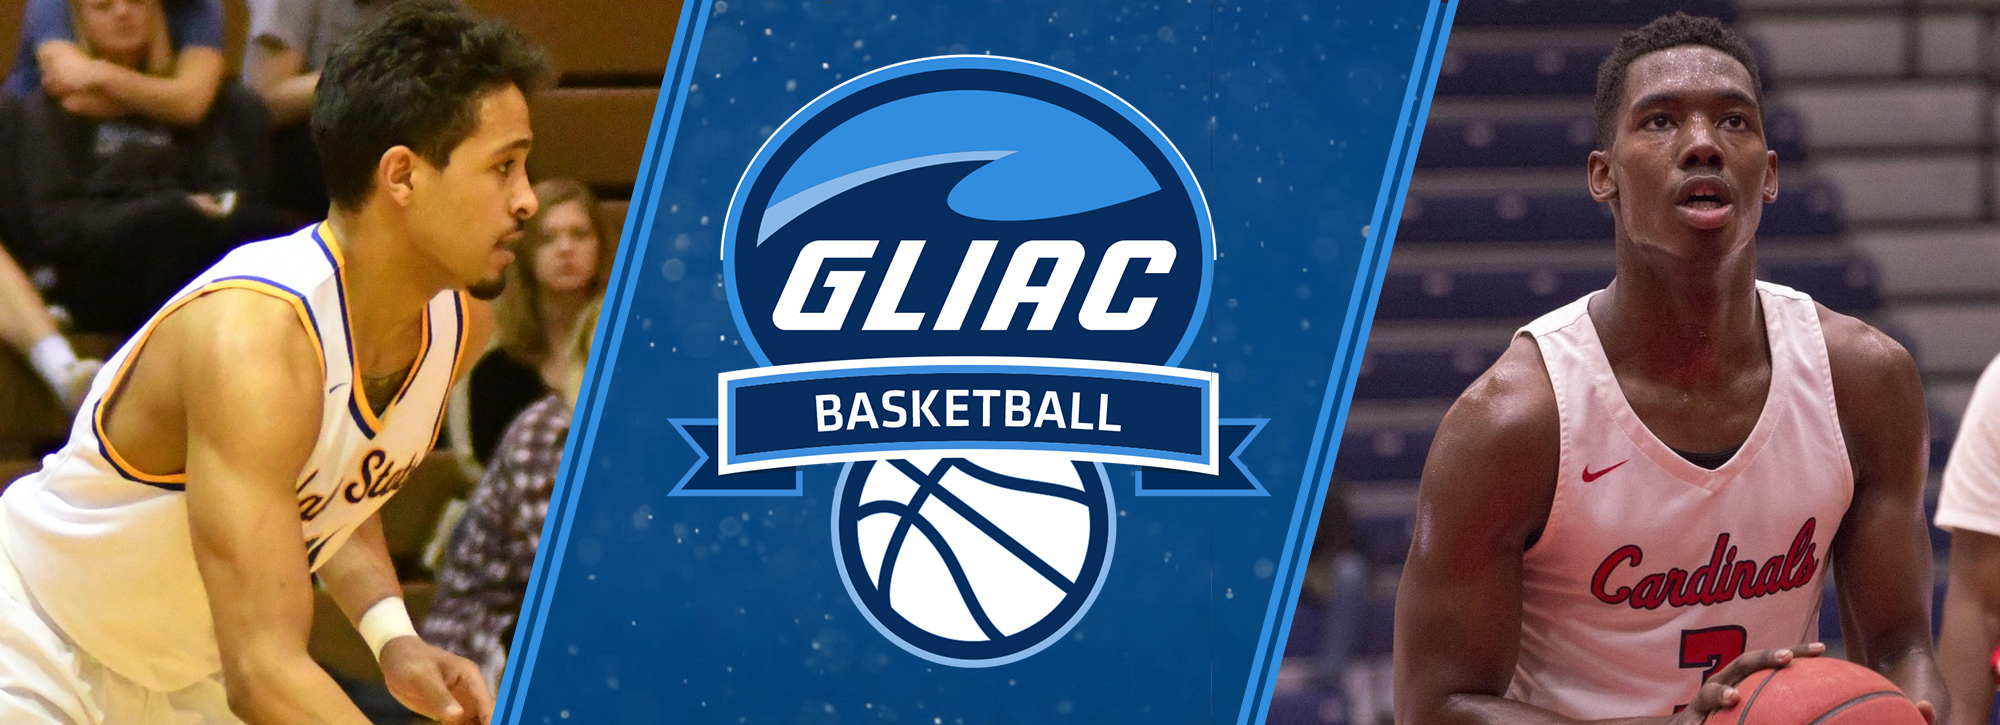 LSSU's Adams and SVSU's Belyeu are named men's basketball players of the week